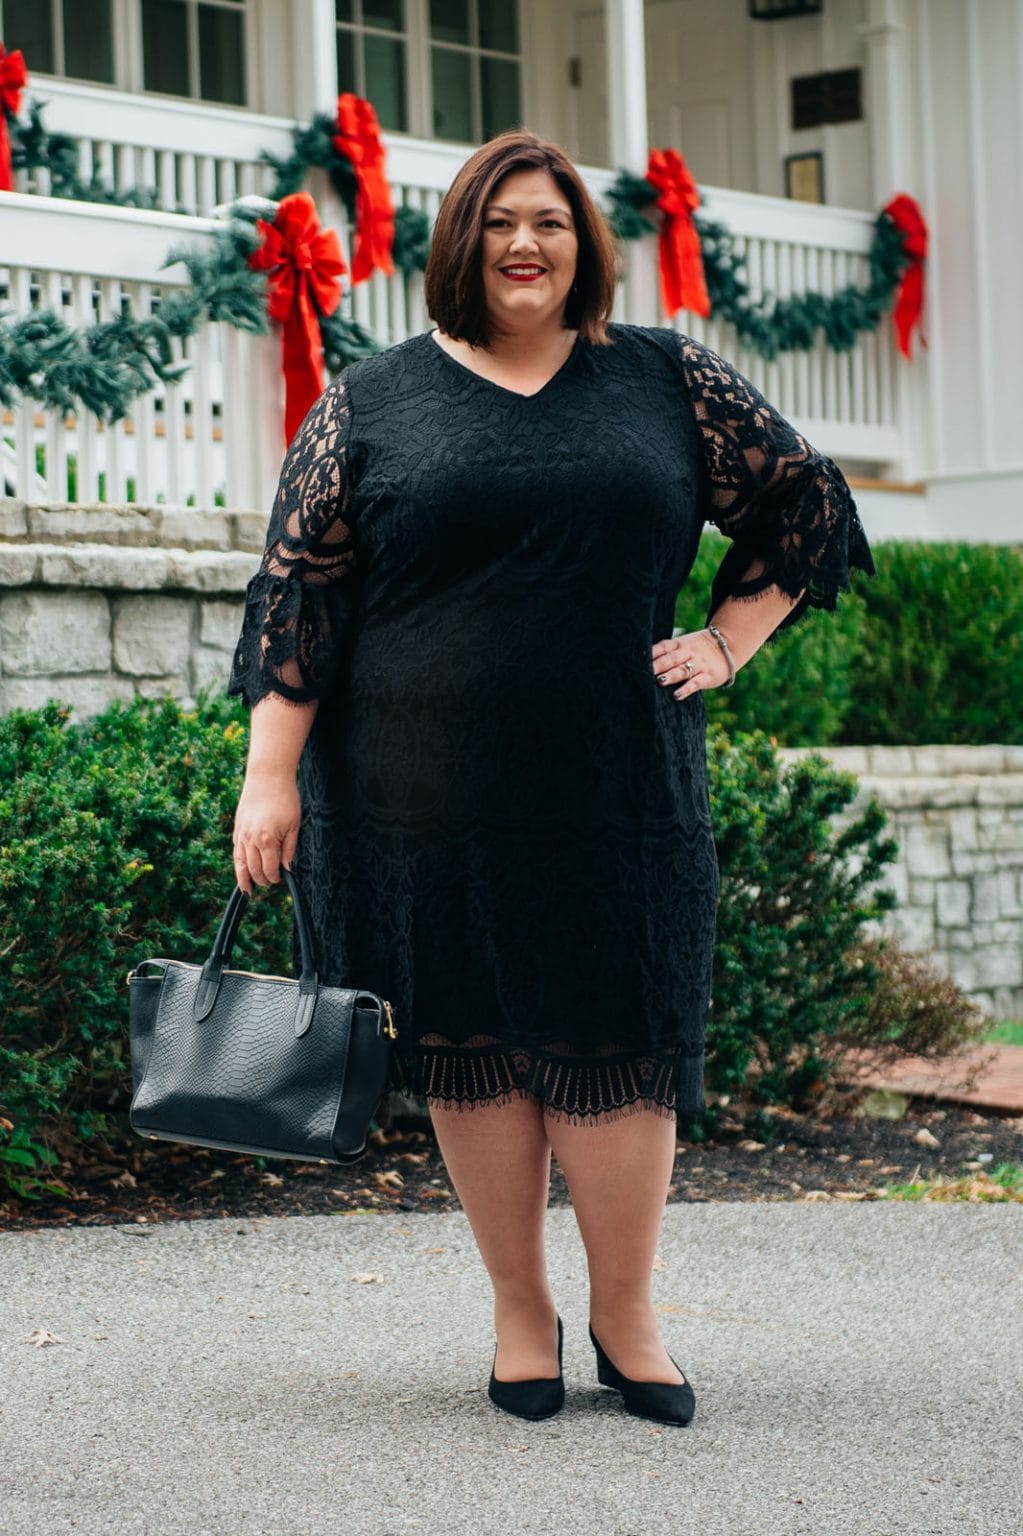 What to wear to a holiday party